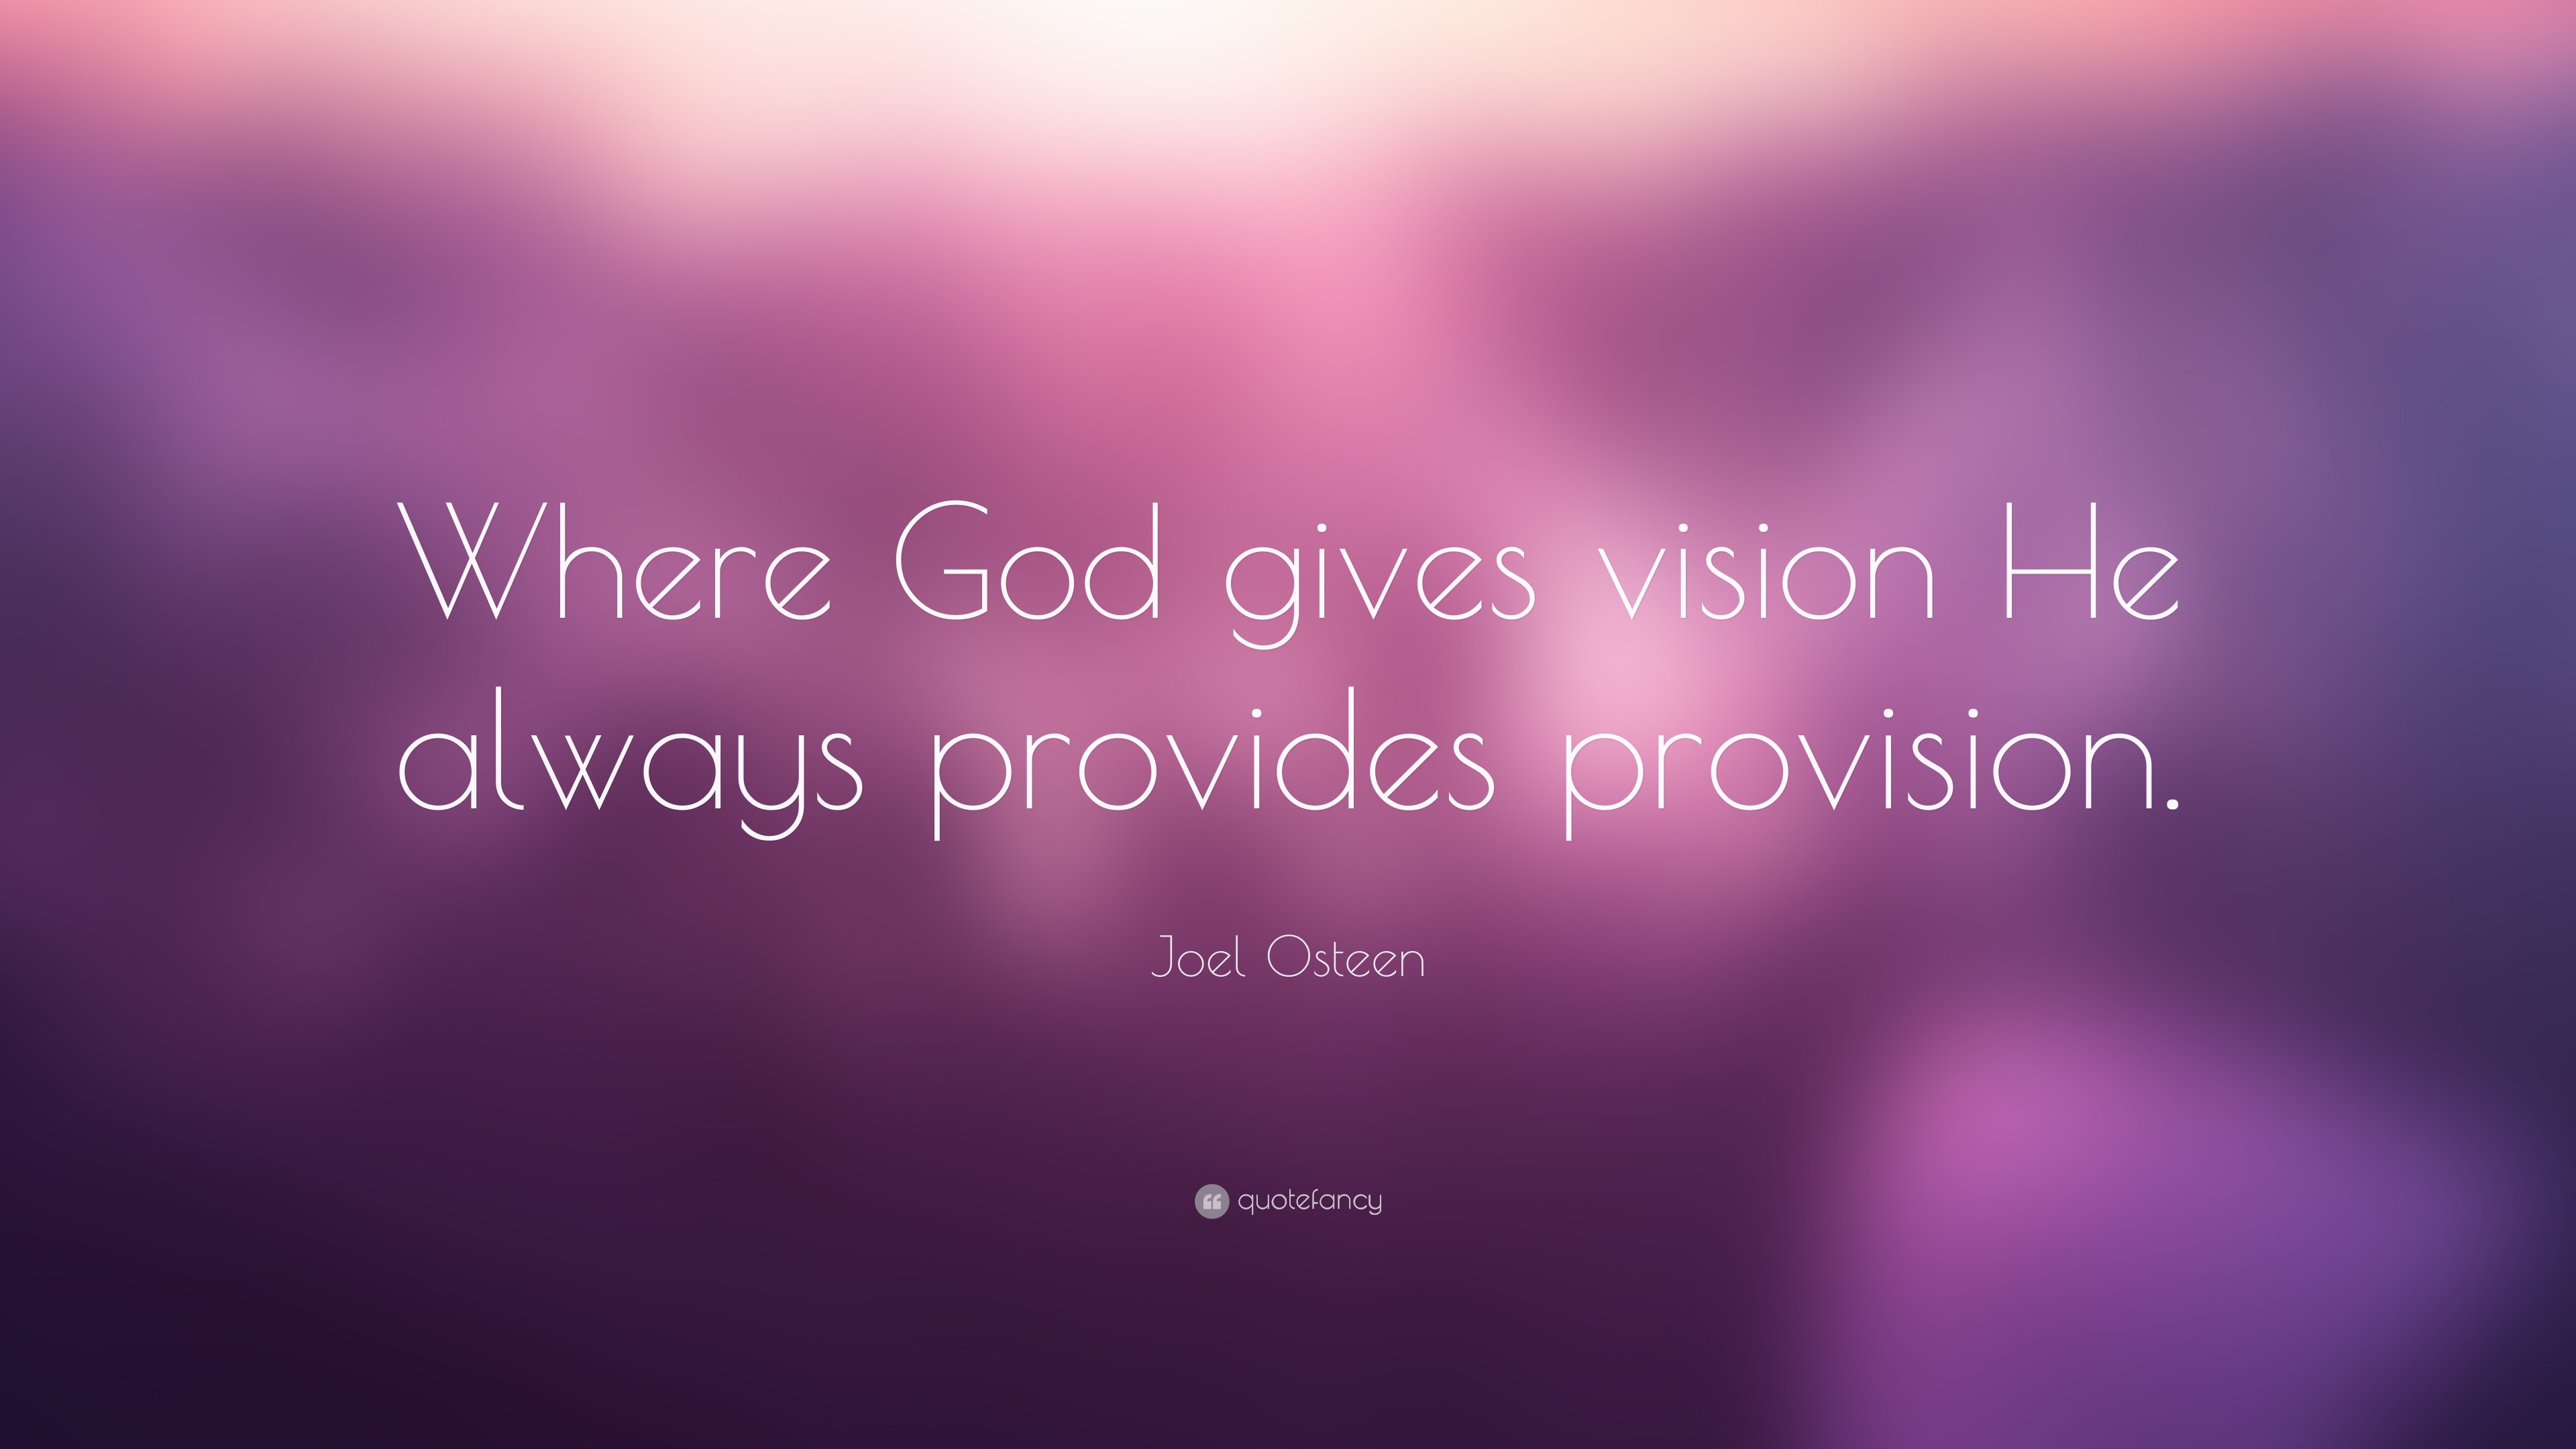 Joel Osteen Quote: “Where God gives vision He always provides provision.”